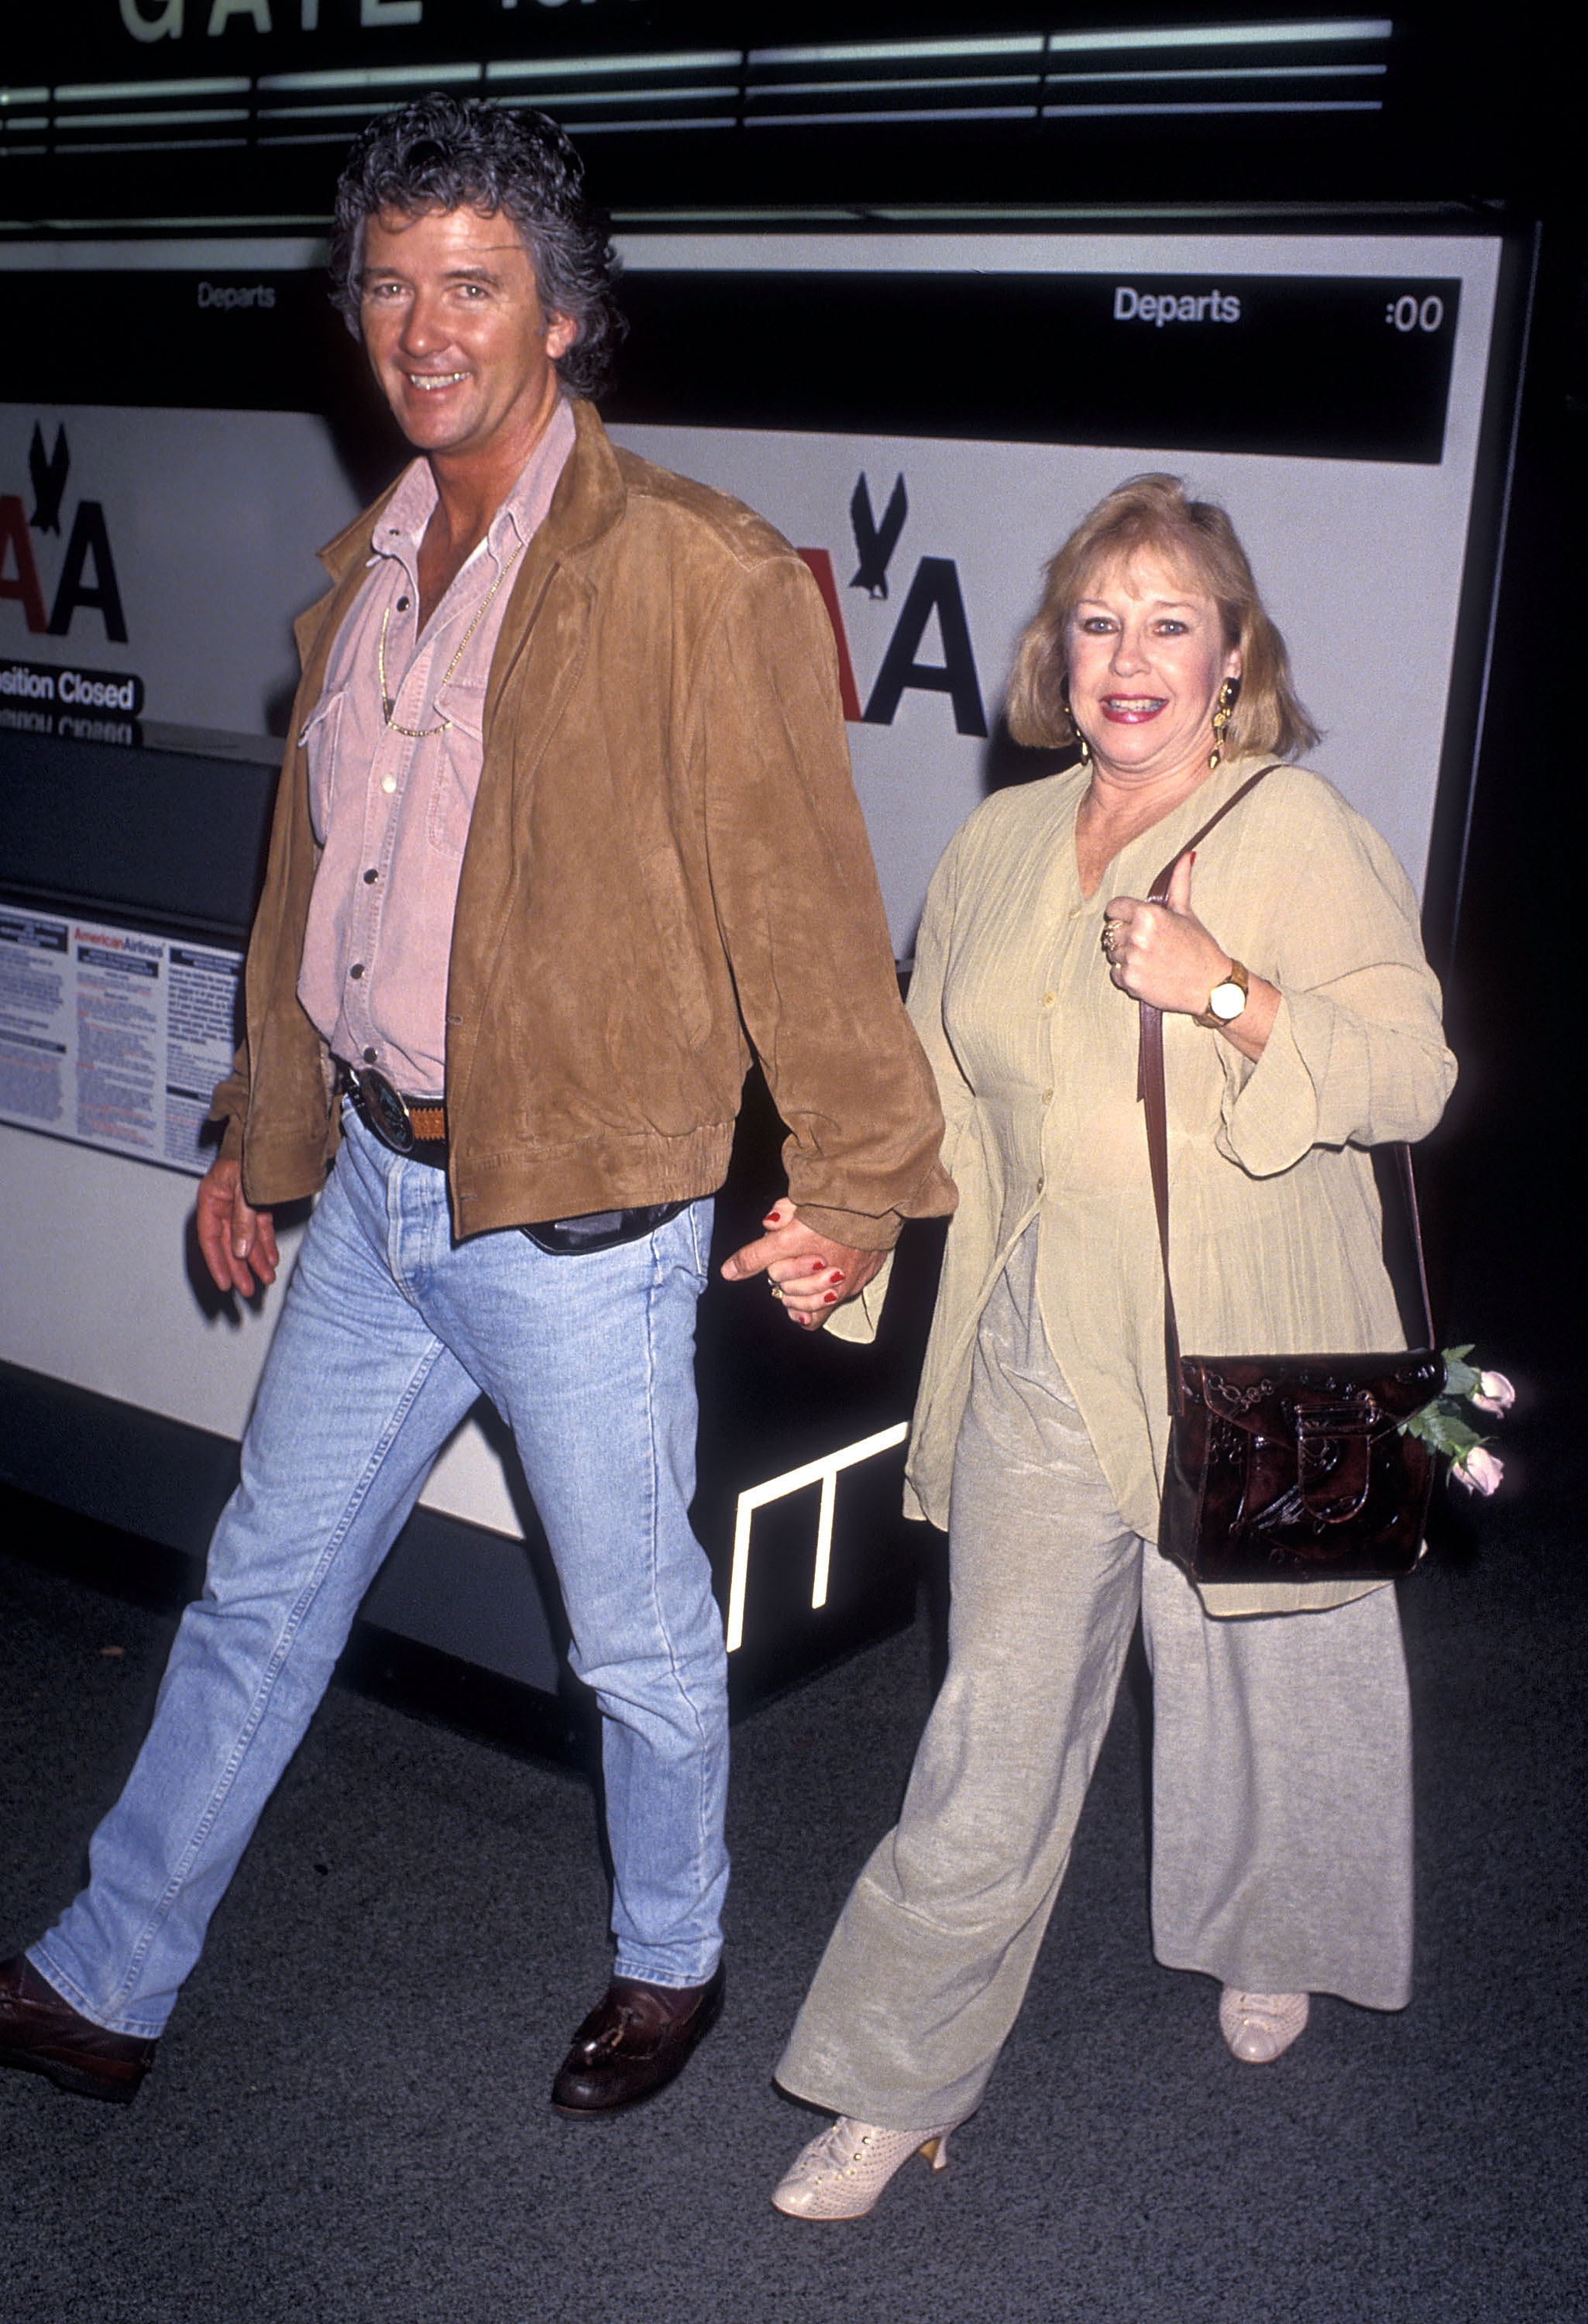 Patrick Duffy and his wife Carlyn arrive from Miami, Florida, on January 26, 1994, at the Los Angeles International Airport in Los Angeles, California | Source: Getty Images